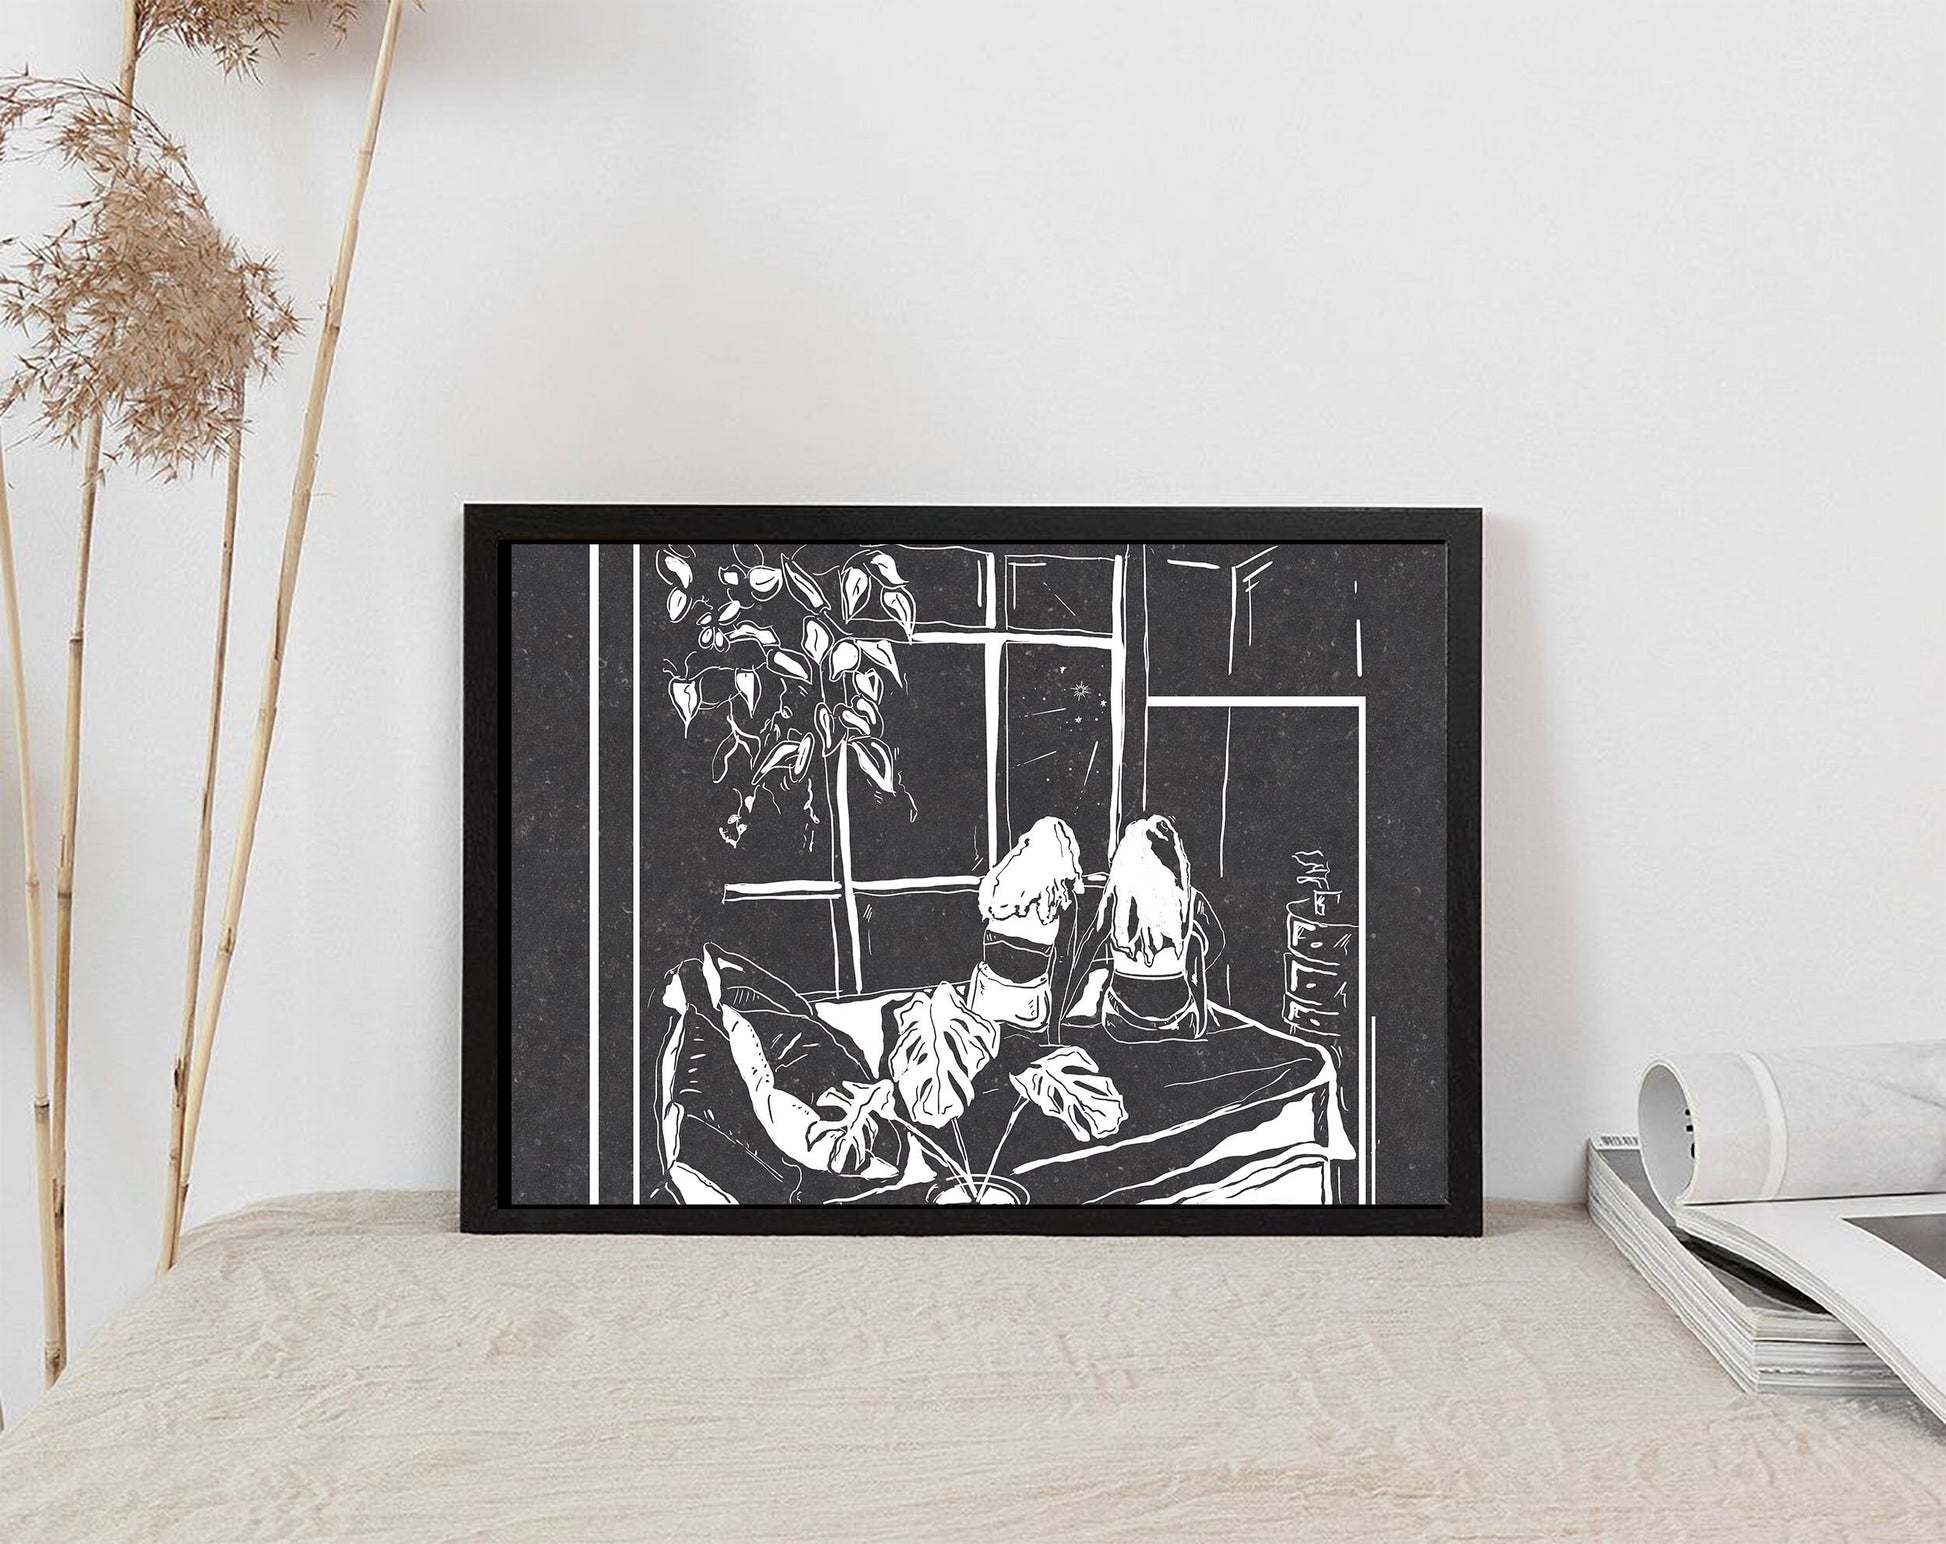 Courtney L Ellis Illustrations Art print by LGBTQ+ Illustration Artist Courtney Ellis. Wall art home decor and gifts. Two female friends holding hands supporting each other sat on a bed watching a shooting star. Black and white art print